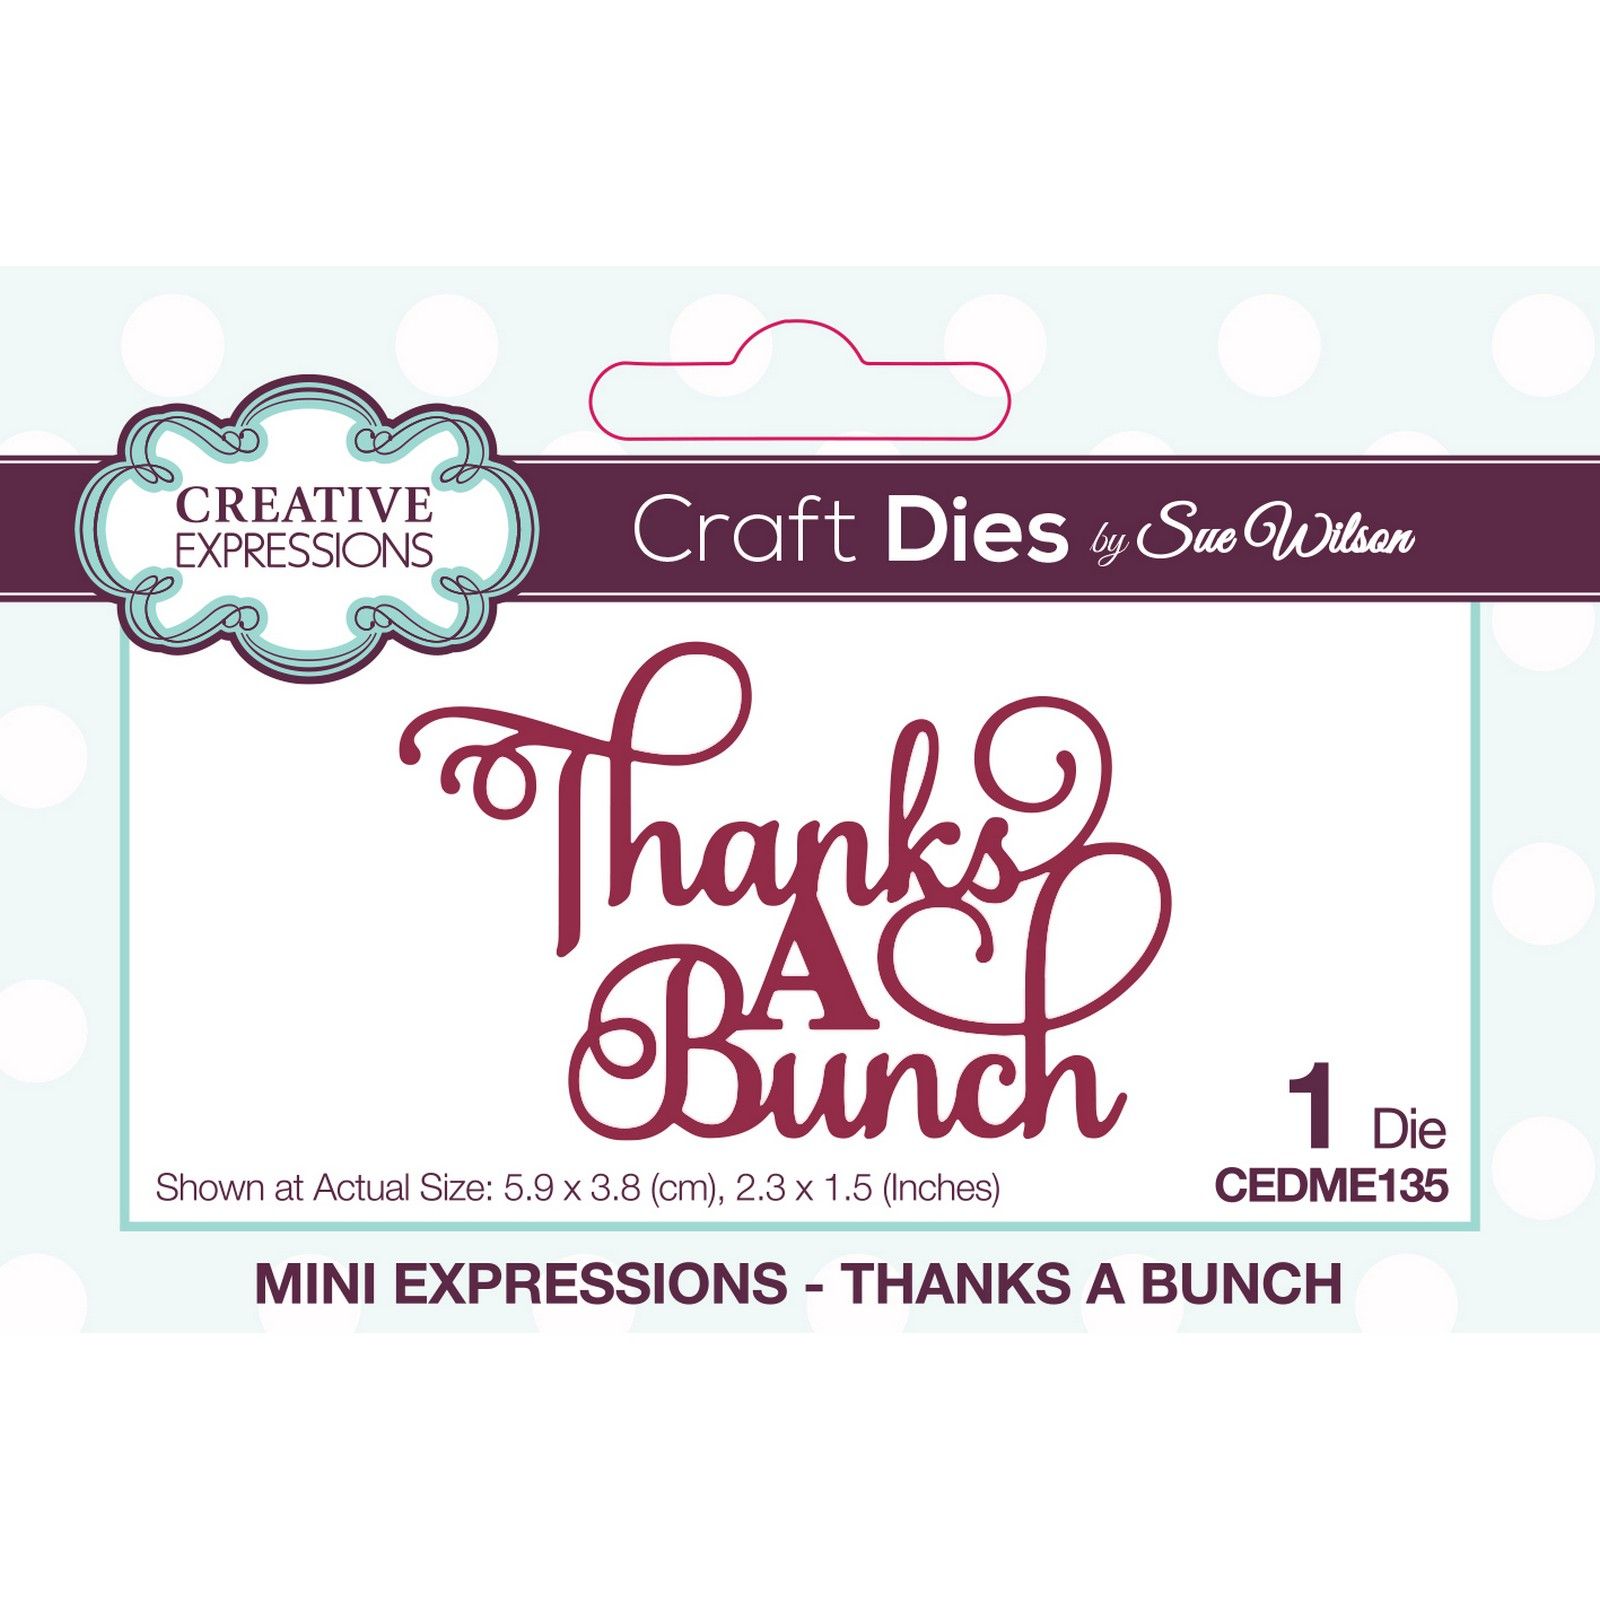 Creative Expressions • Craft Die Thanks a Bunch